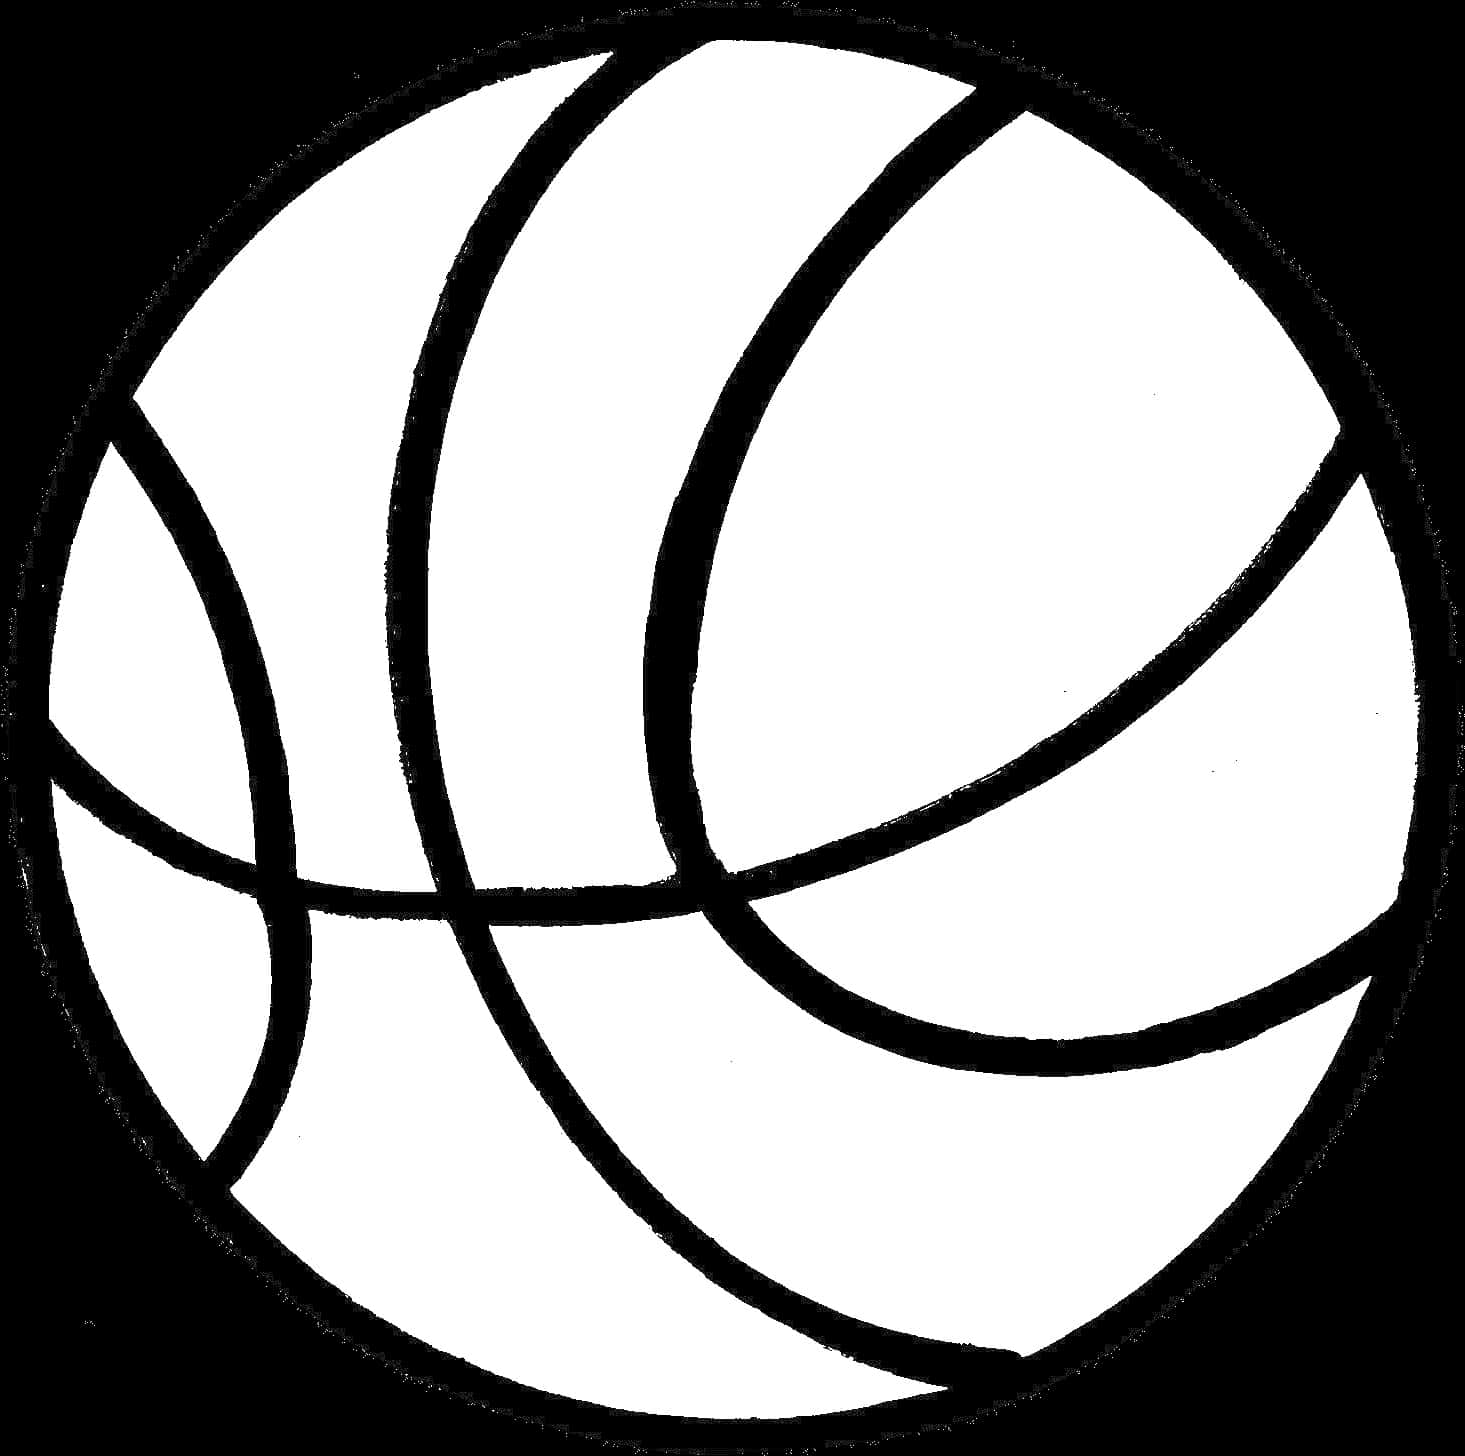 Monochrome Basketball Graphic PNG image